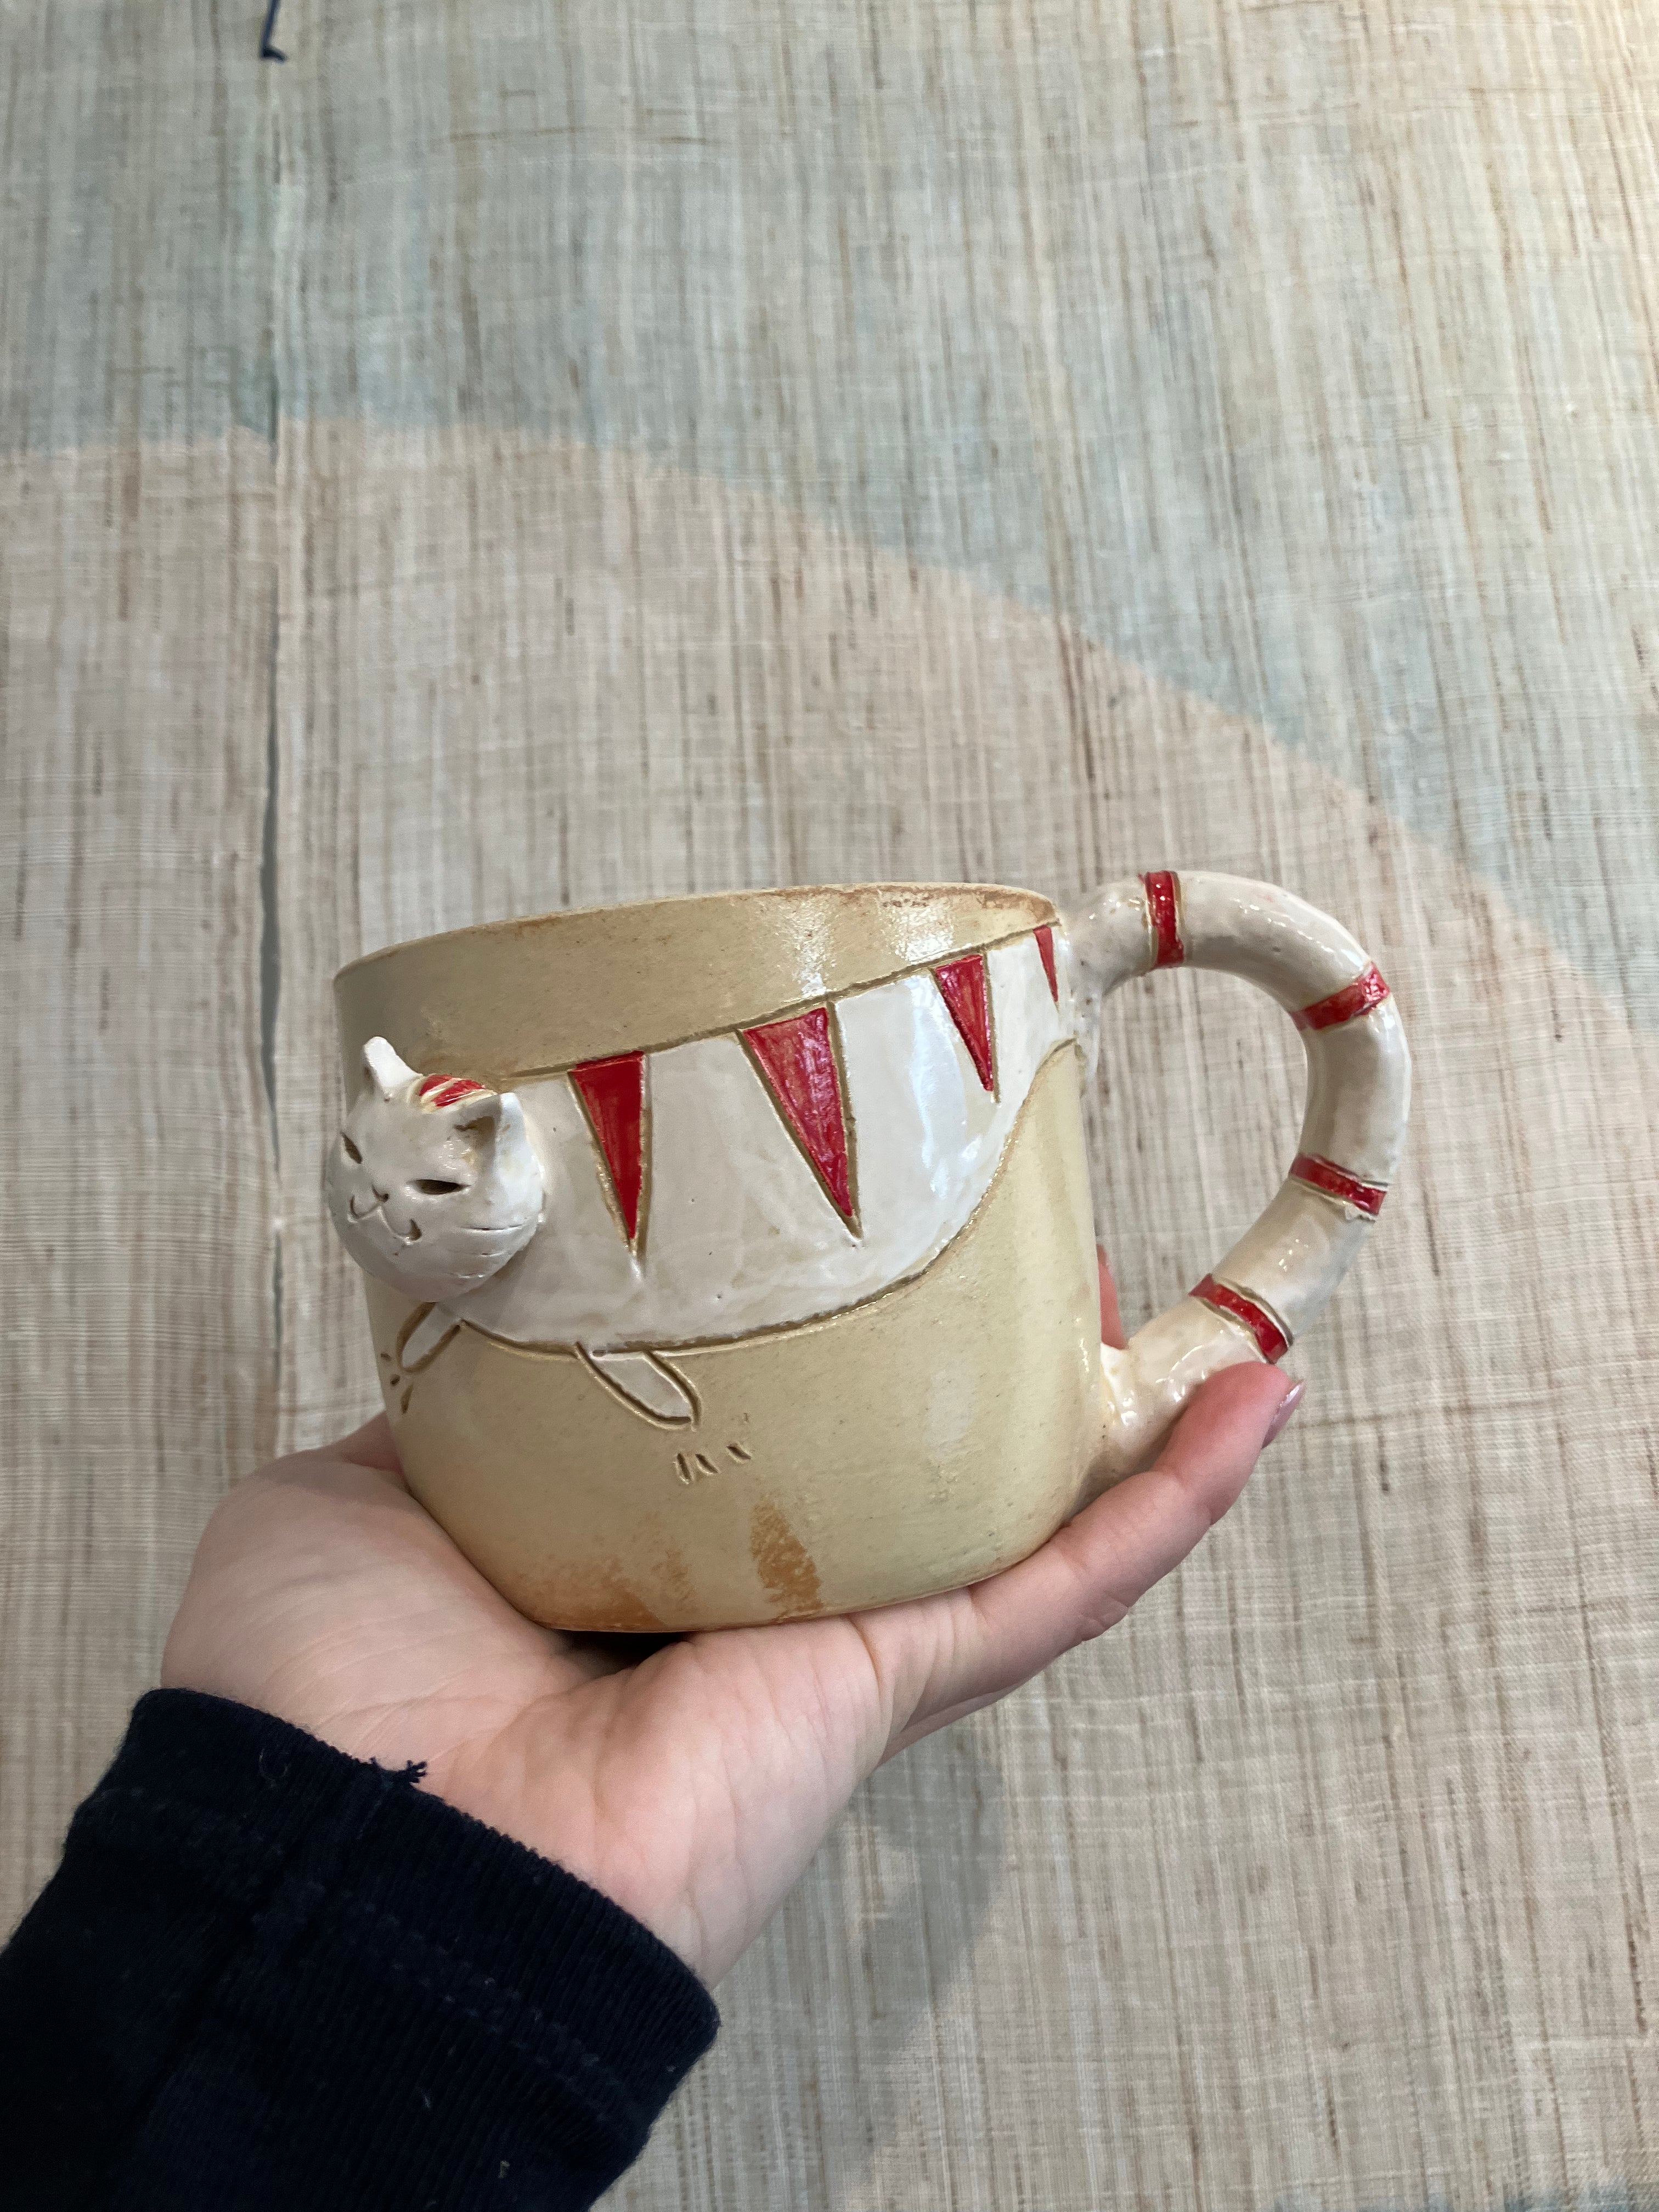 Handmade cup with cat and handle